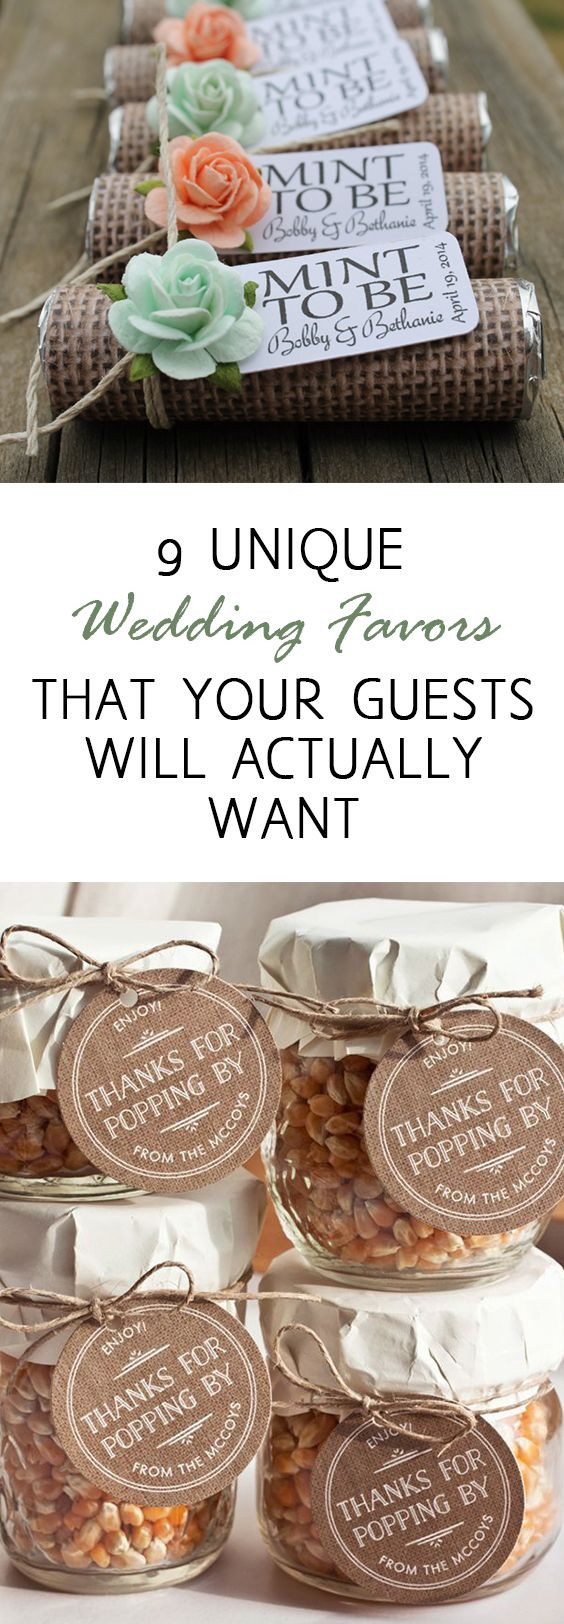 Good Cheap Wedding Gifts
 9 Unique Wedding Favors that Your Guests Will Actually